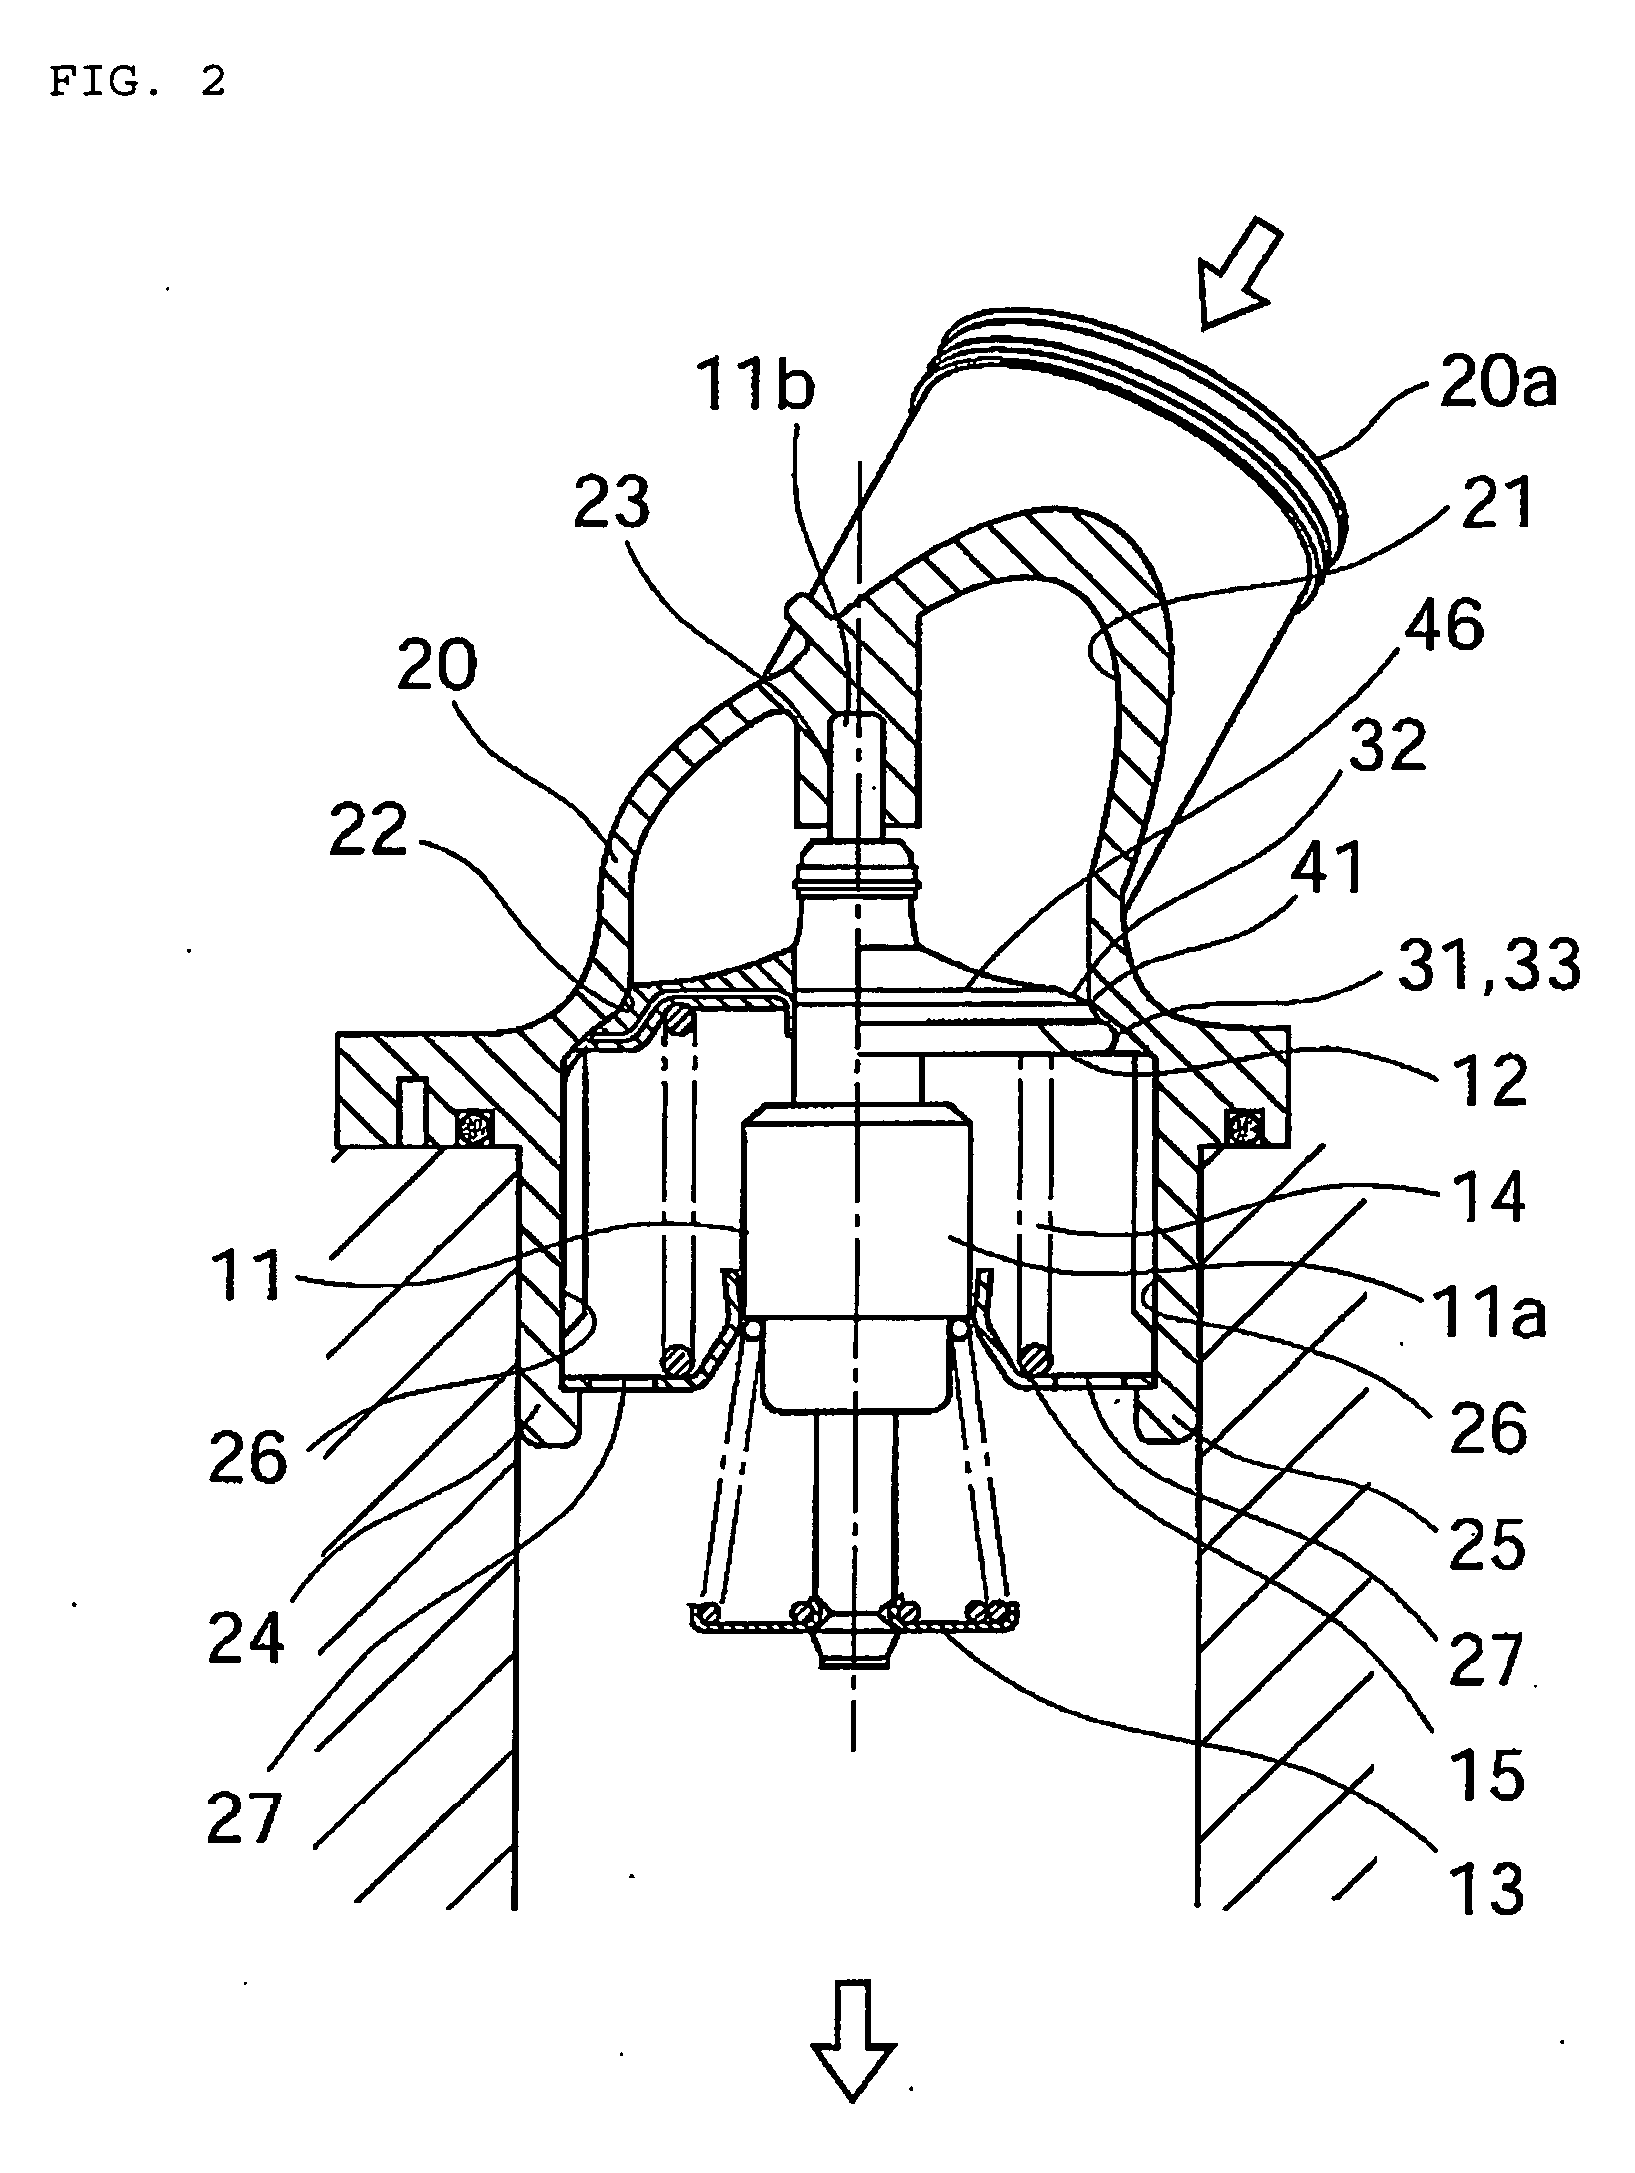 Thermostat device